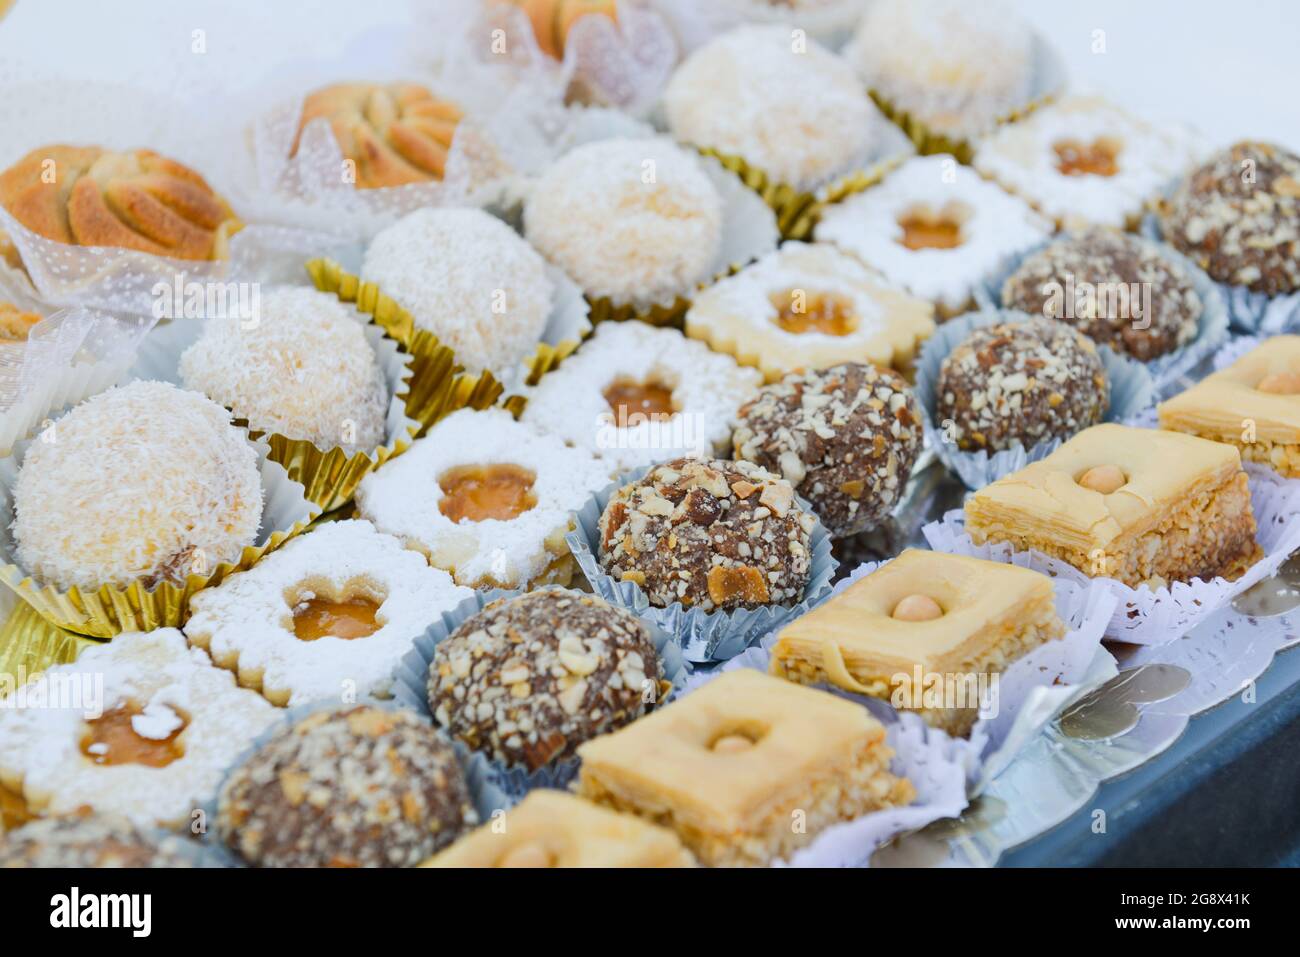 Assortment of traditional oriental pastries presented in a dish, filling the top view image Stock Photo